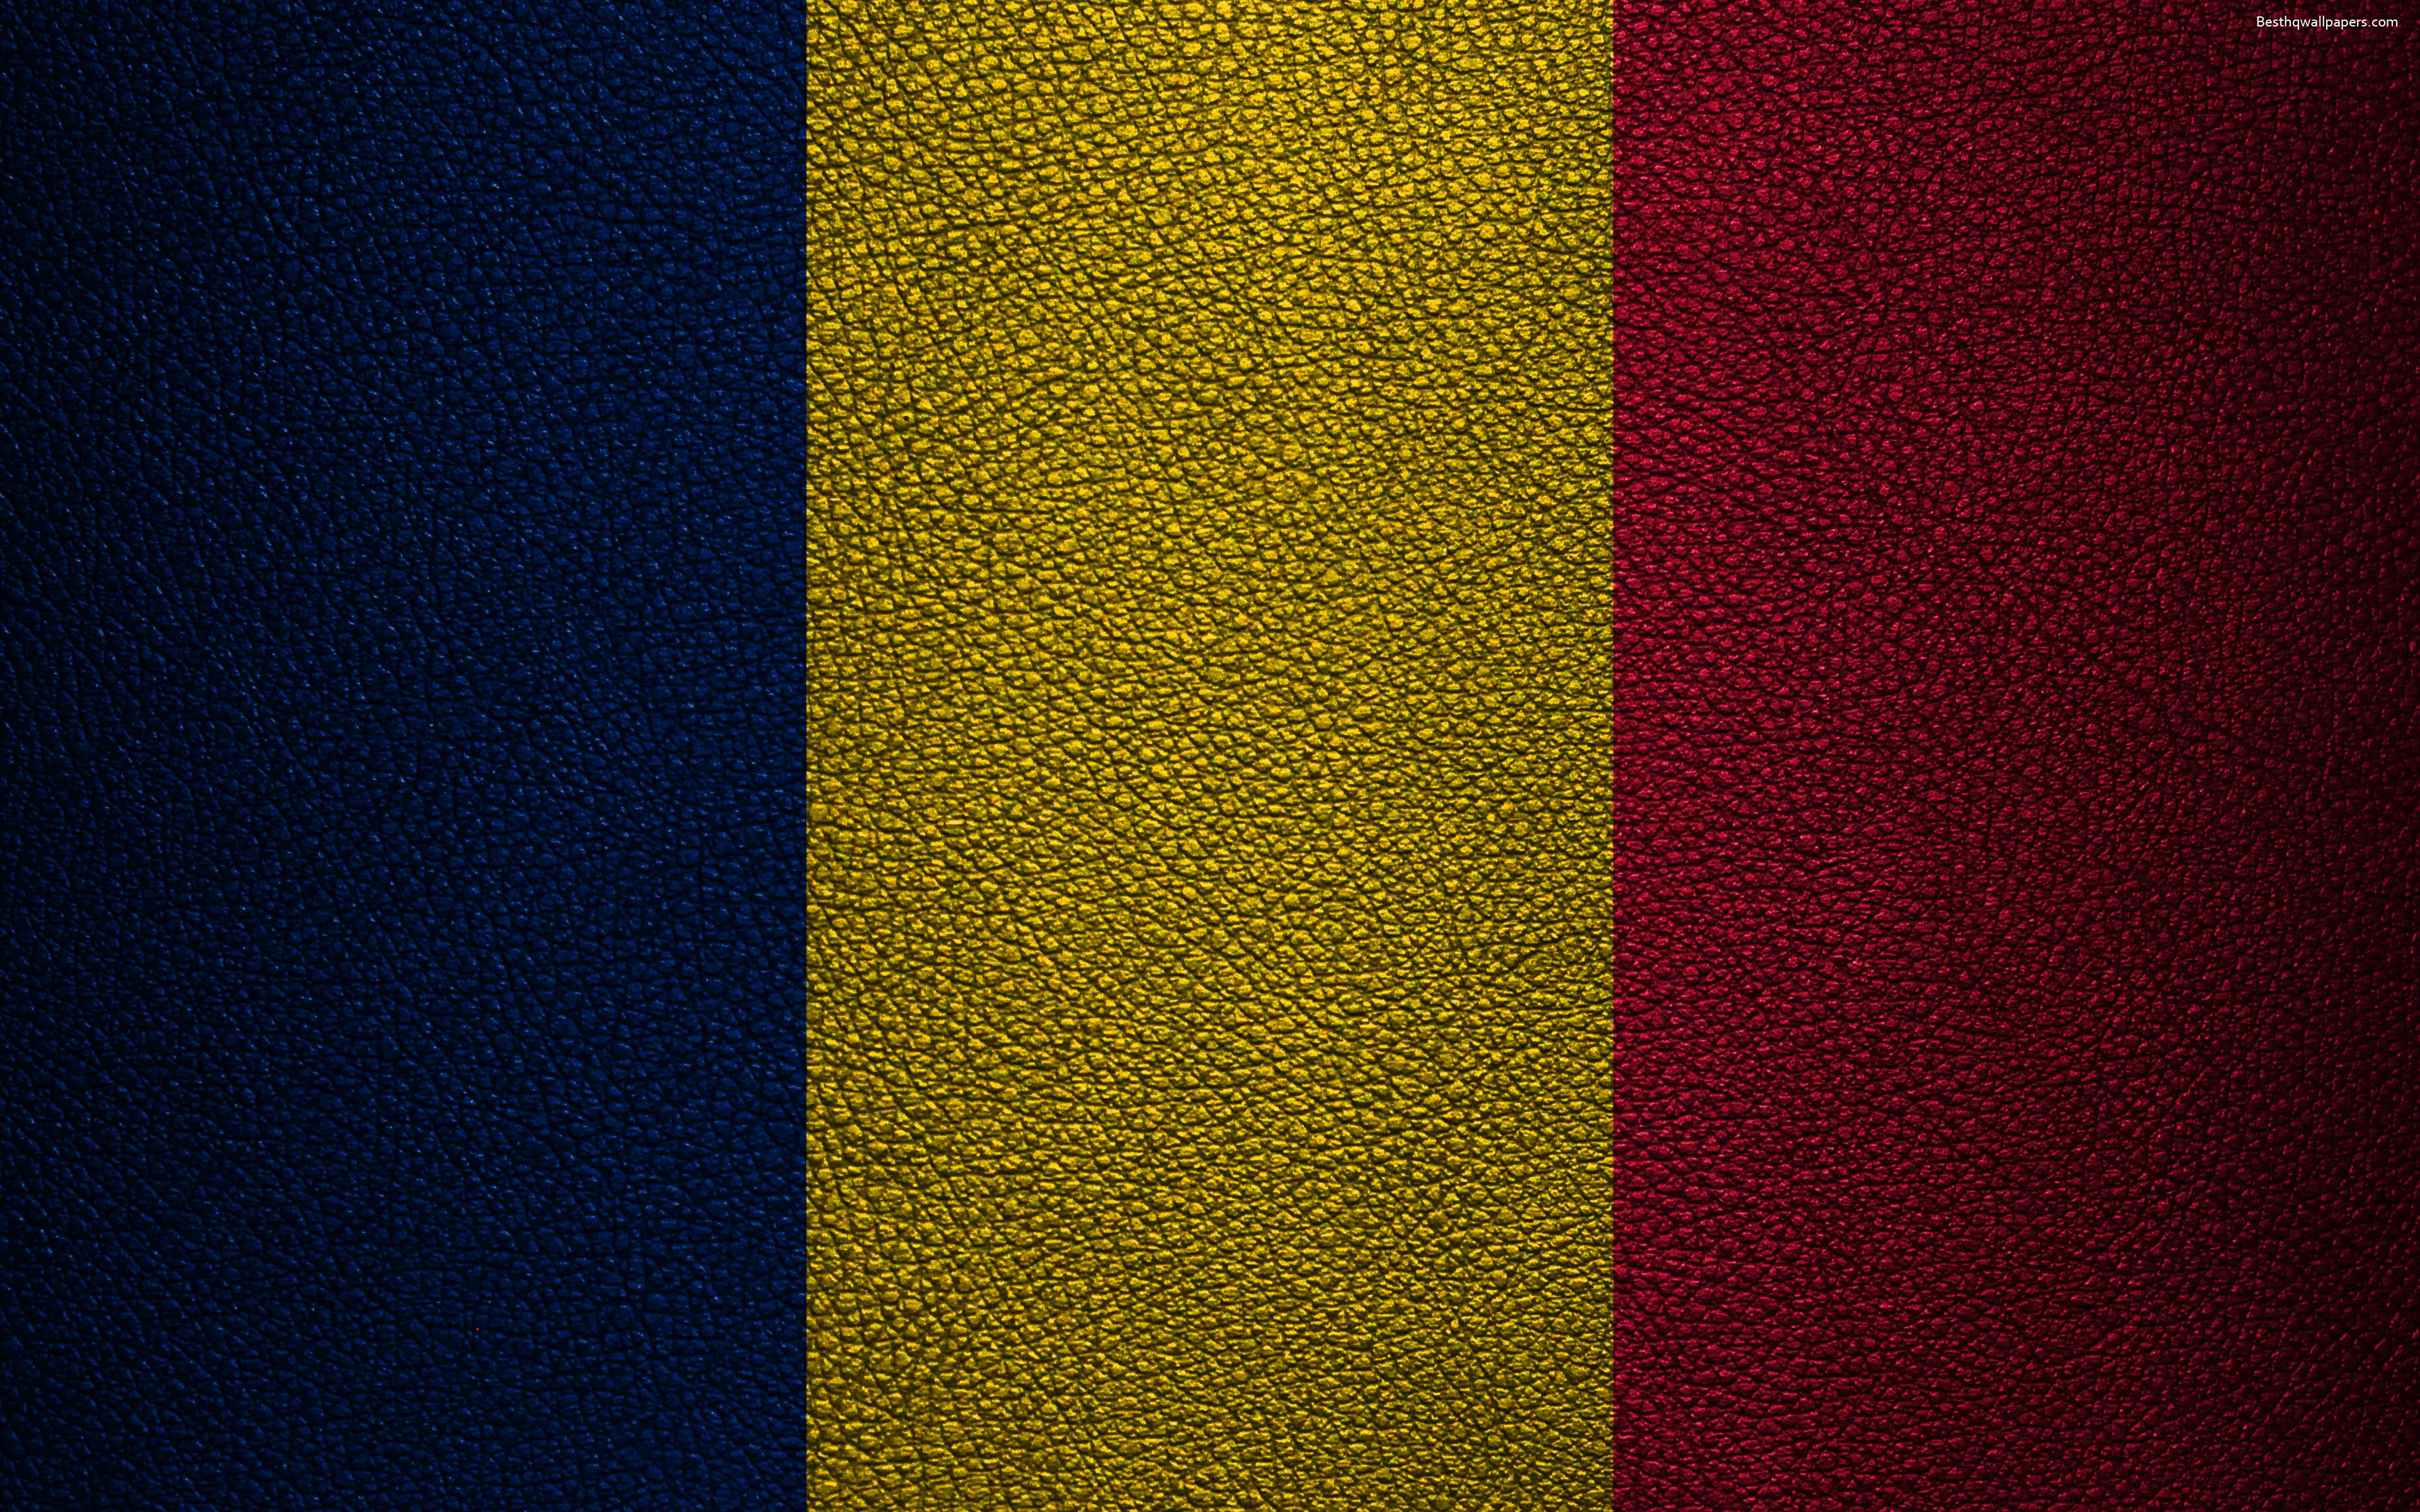 Download wallpaper Flag of Chad, Africa, 4k, leather texture, Chad